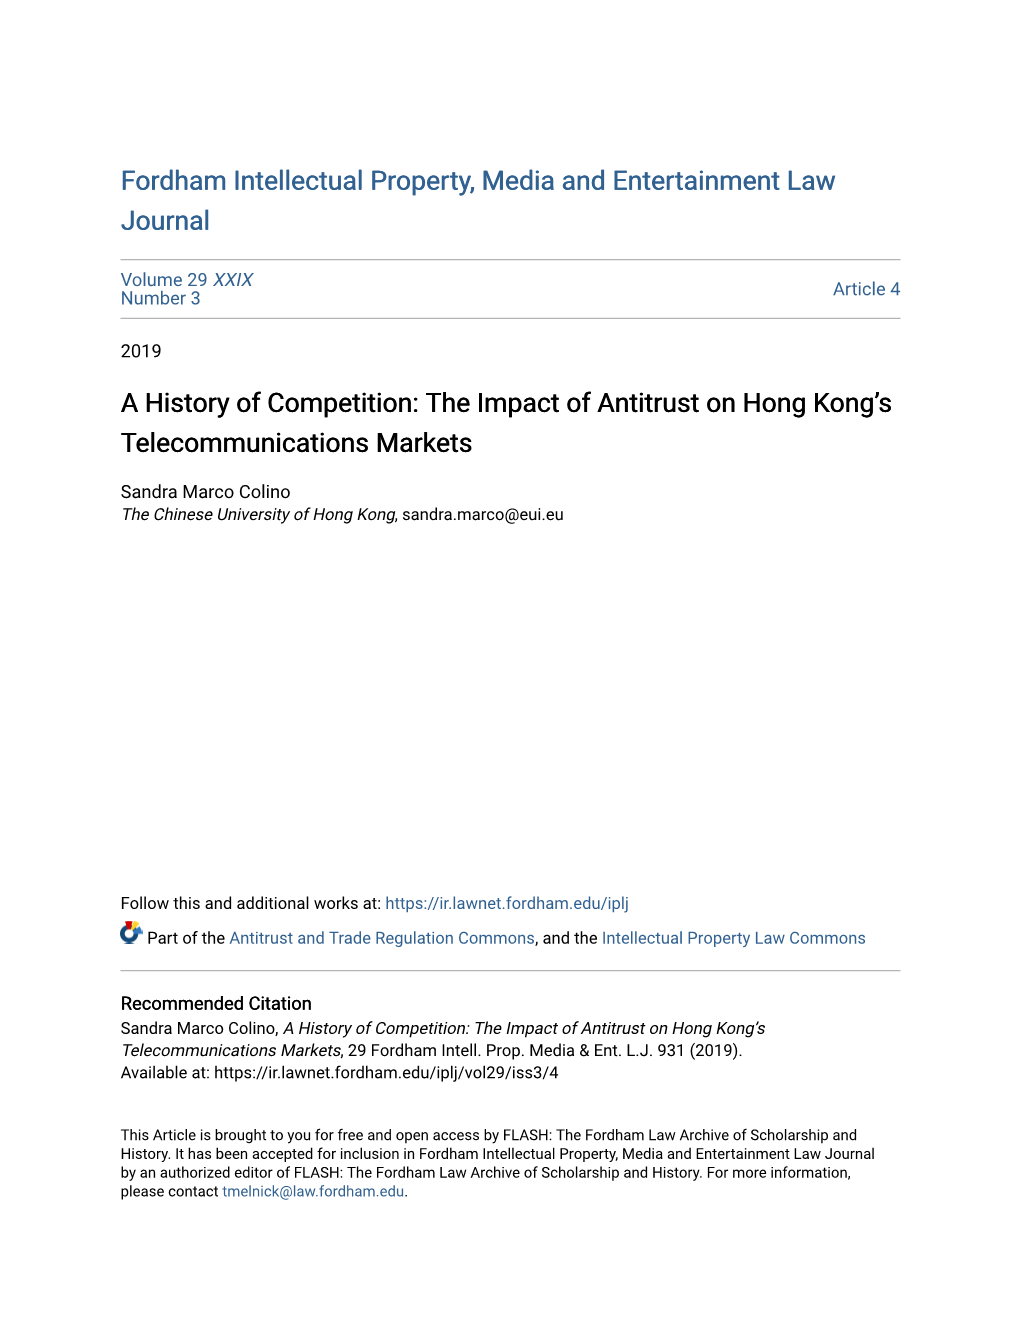 A History of Competition: the Impact of Antitrust on Hong Kong’S Telecommunications Markets